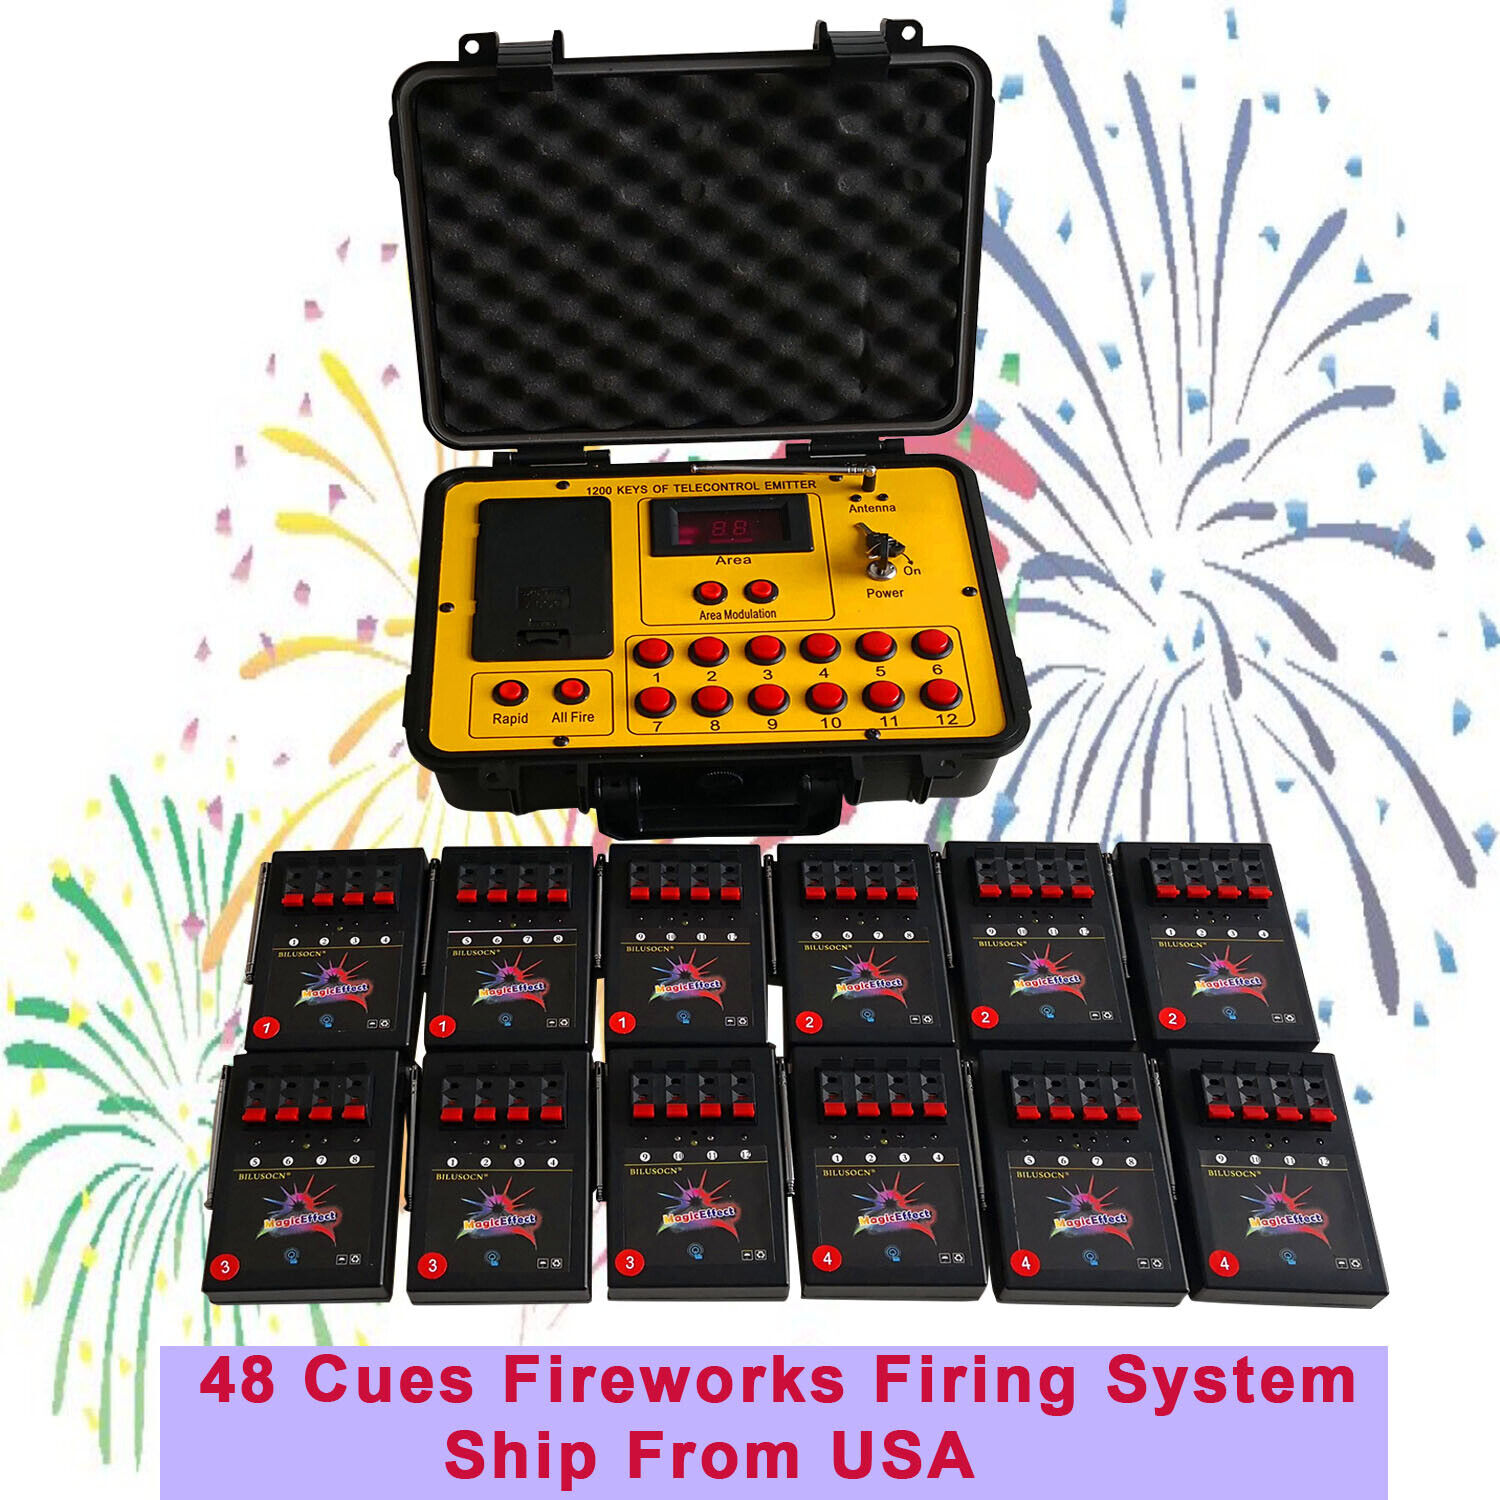 Free Ship From USA 48 Cues Fireworks Firing System 500M ABS Waterproof Control